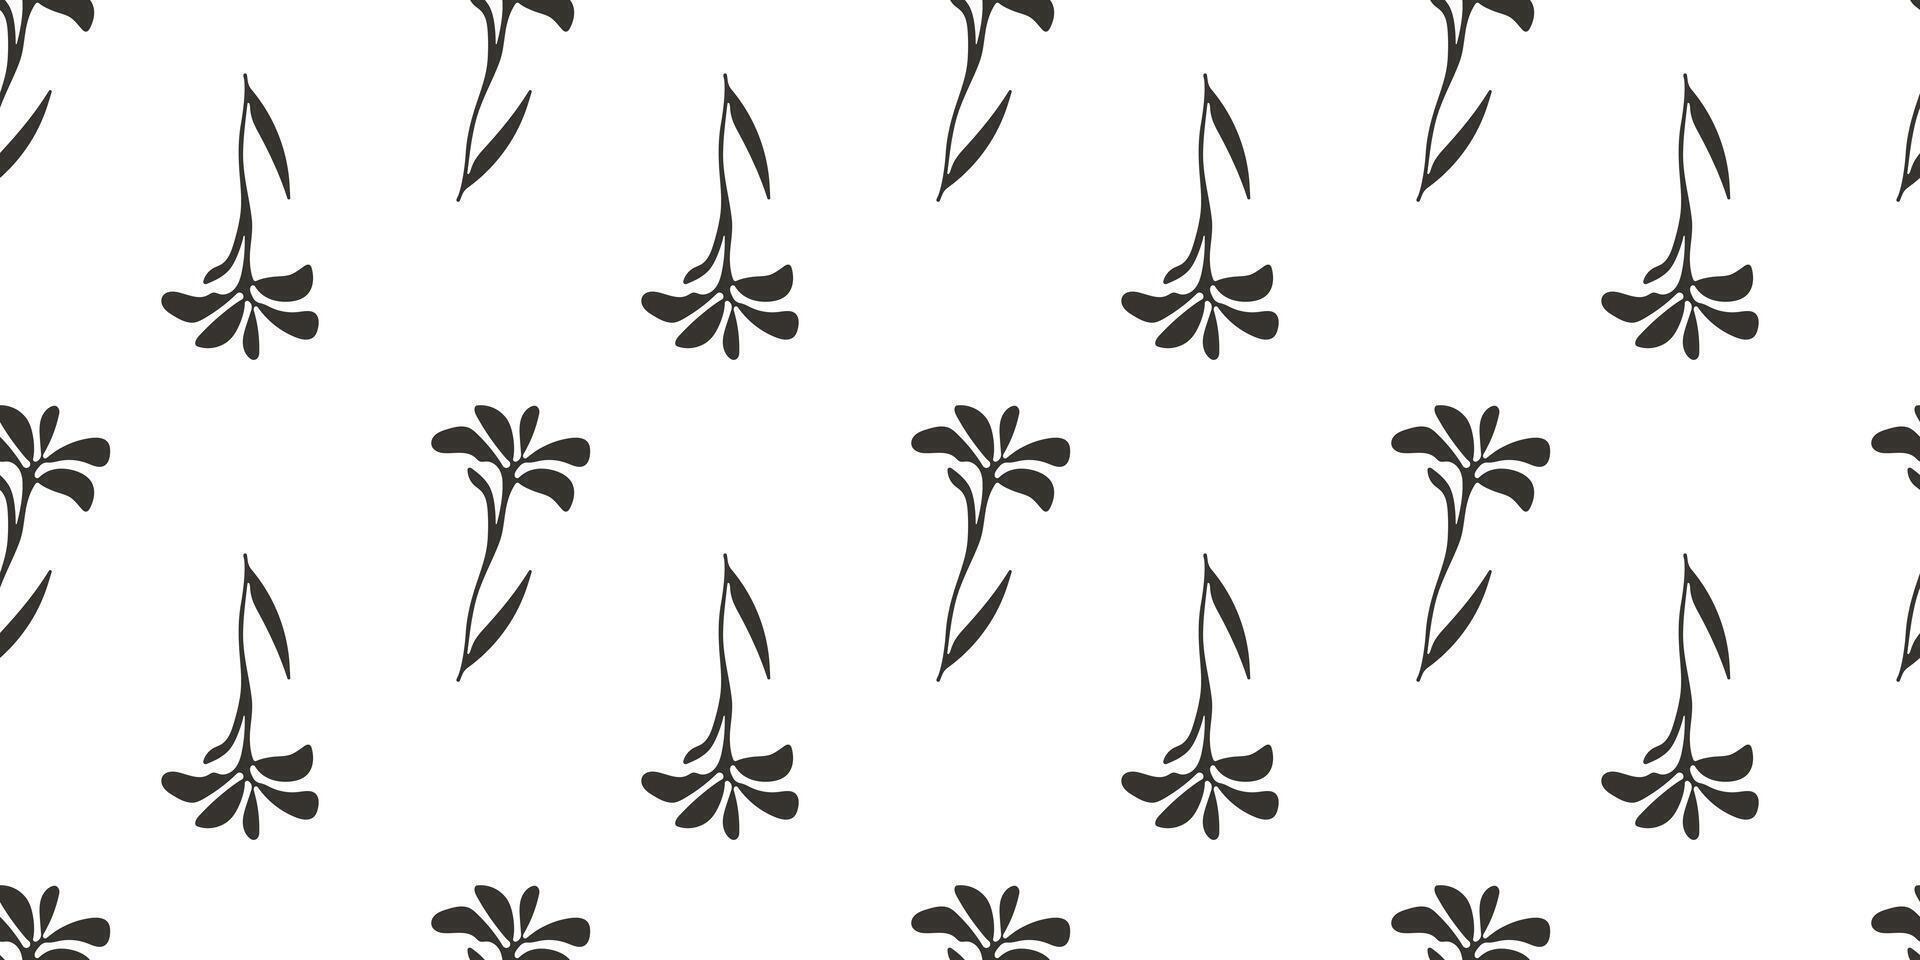 Minimalist hand drawn flower seamless pattern. Children style floral doodle background, nature shapes wallpaper vector